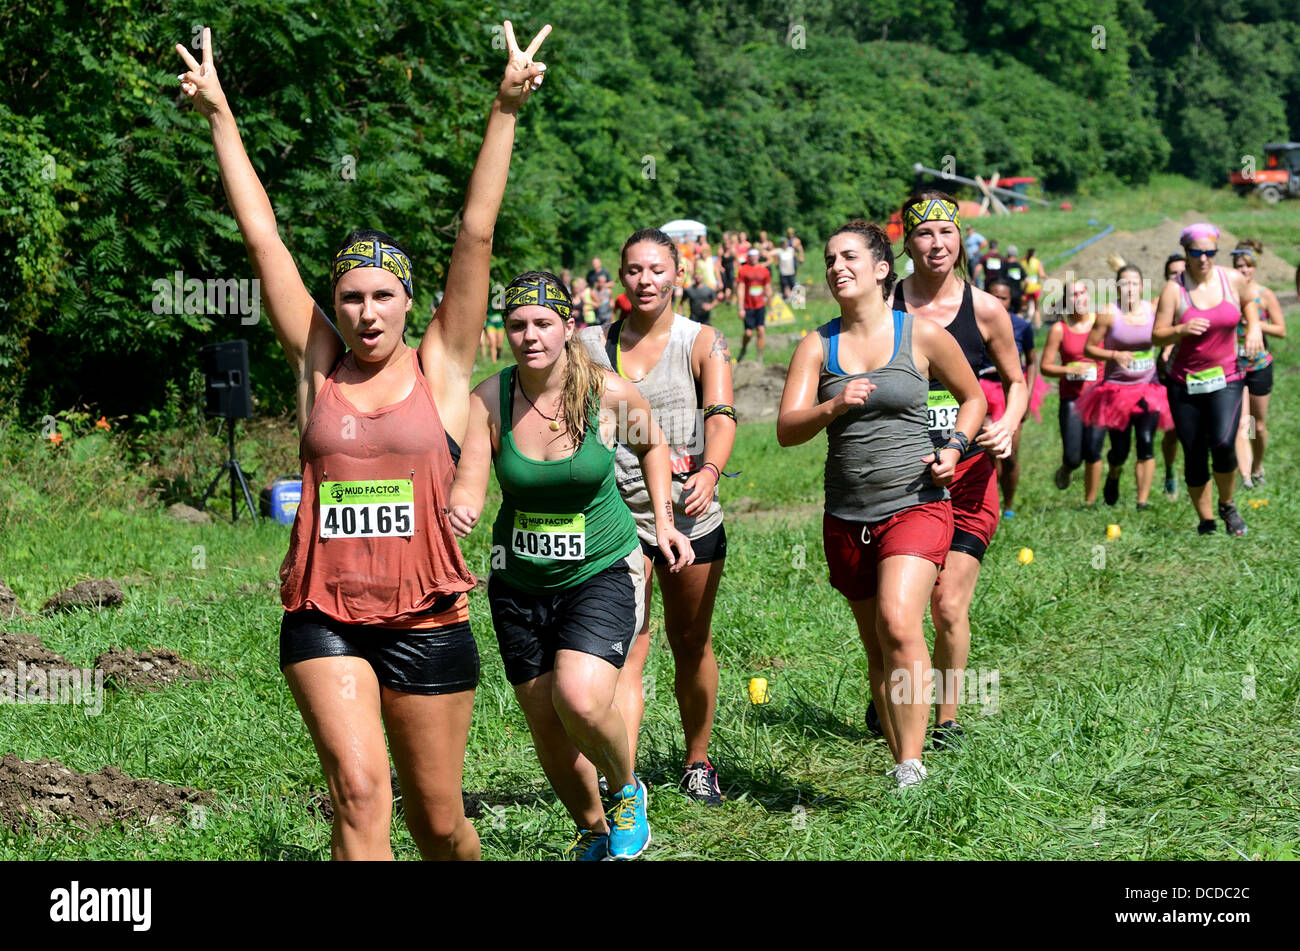 Racers competing in Mud run race Stock Photo Alamy